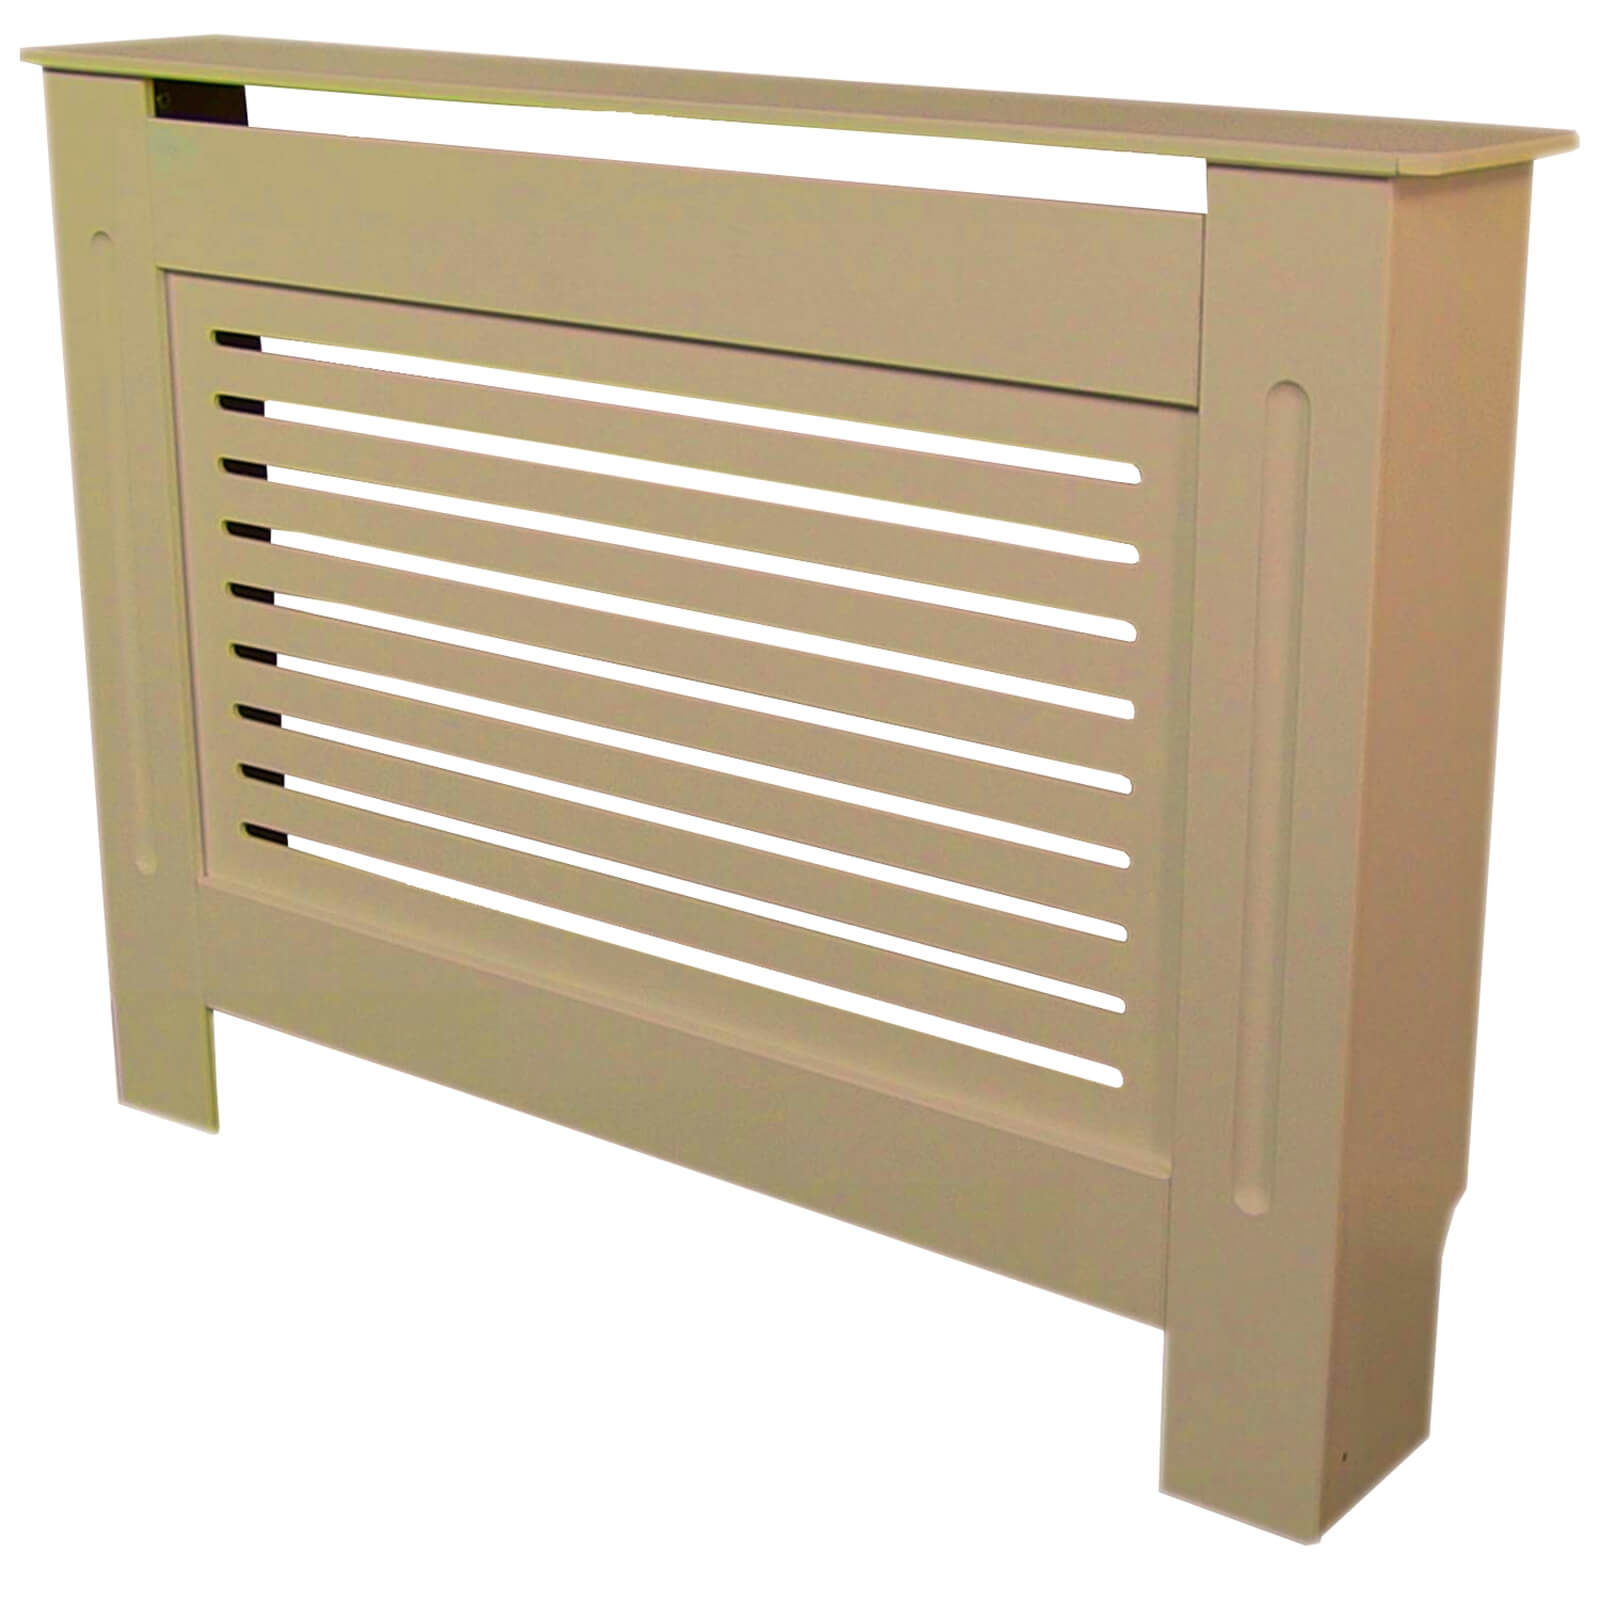 Radiator Cover with Horizontal Slatted Design in Unpainted - Small